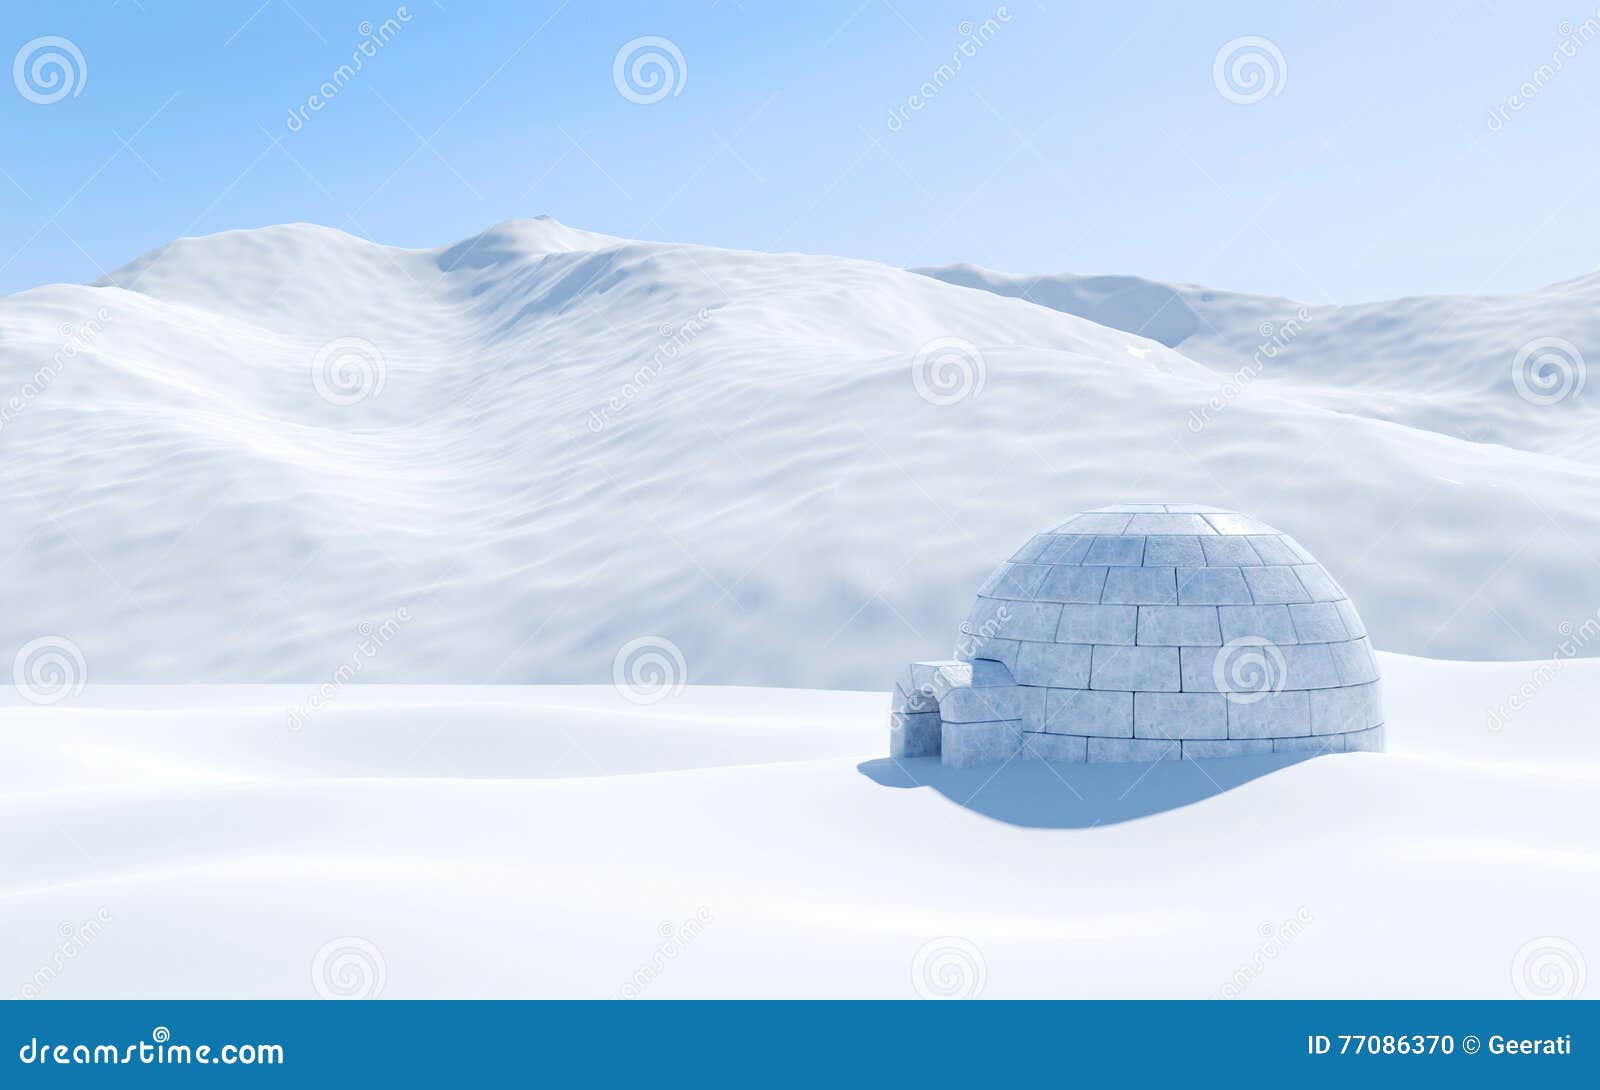 igloo  in snowfield with snowy mountain, arctic landscape scene